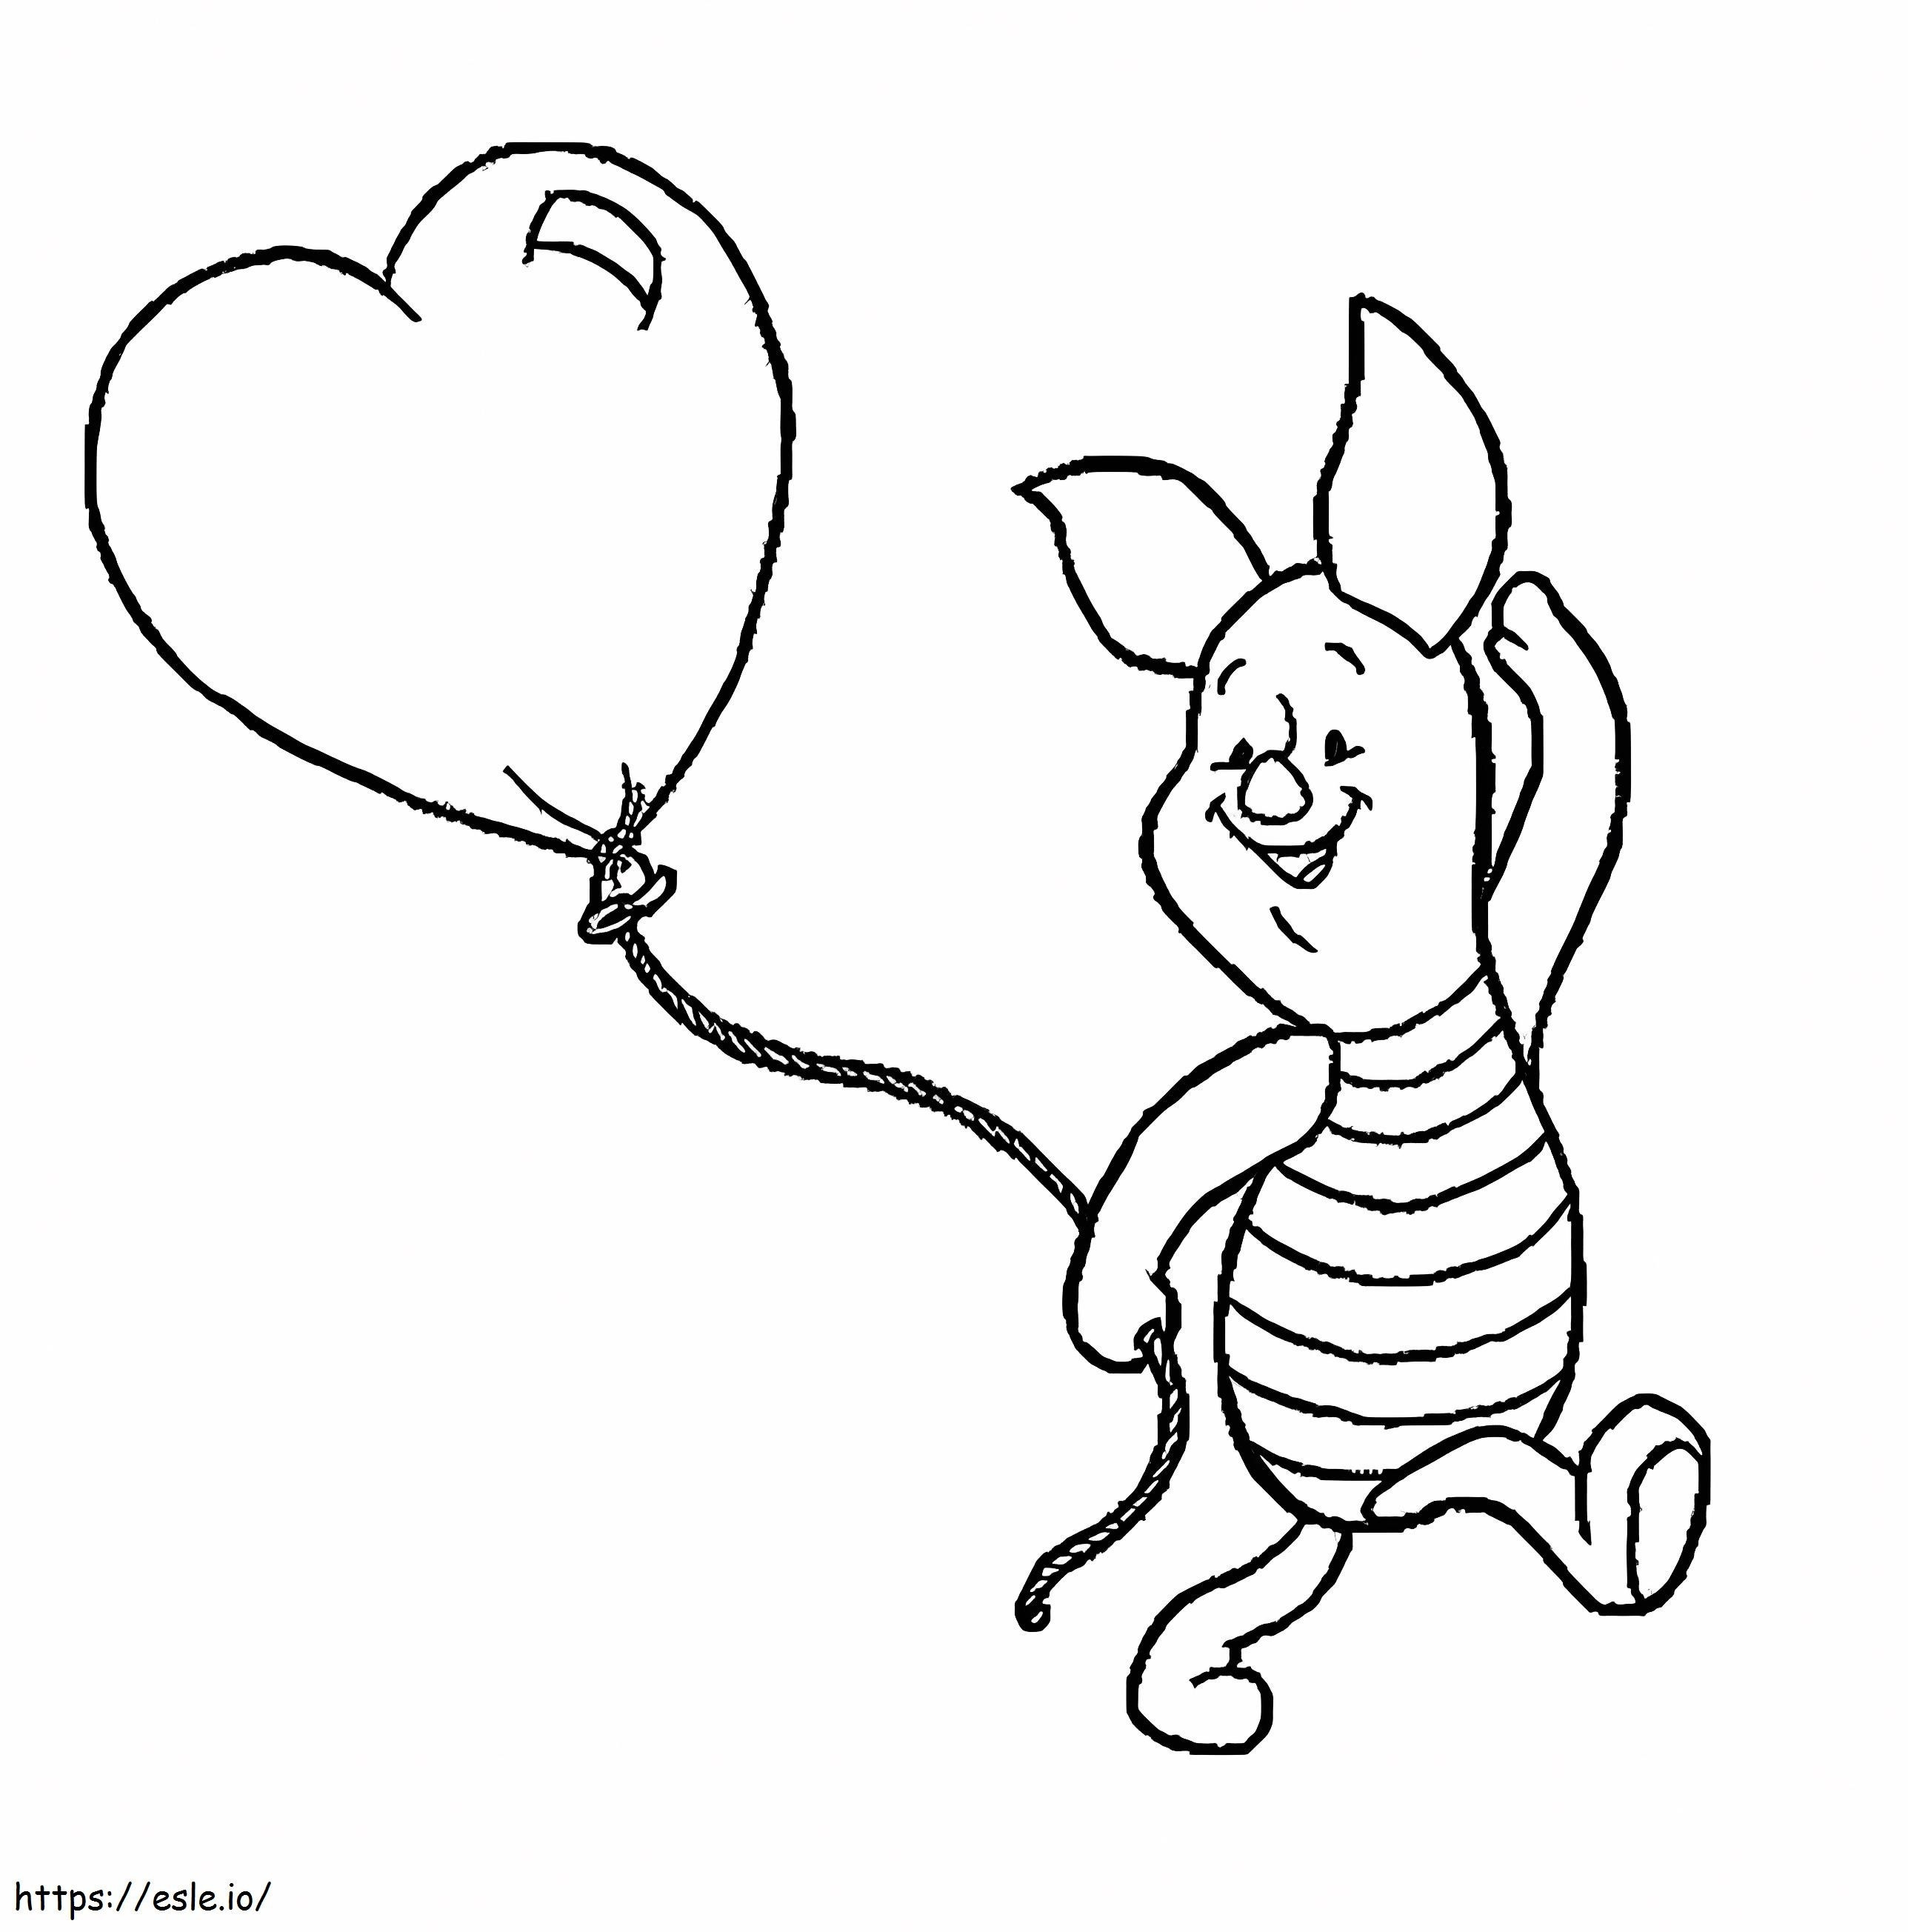 Piglet With Heart Balloon coloring page